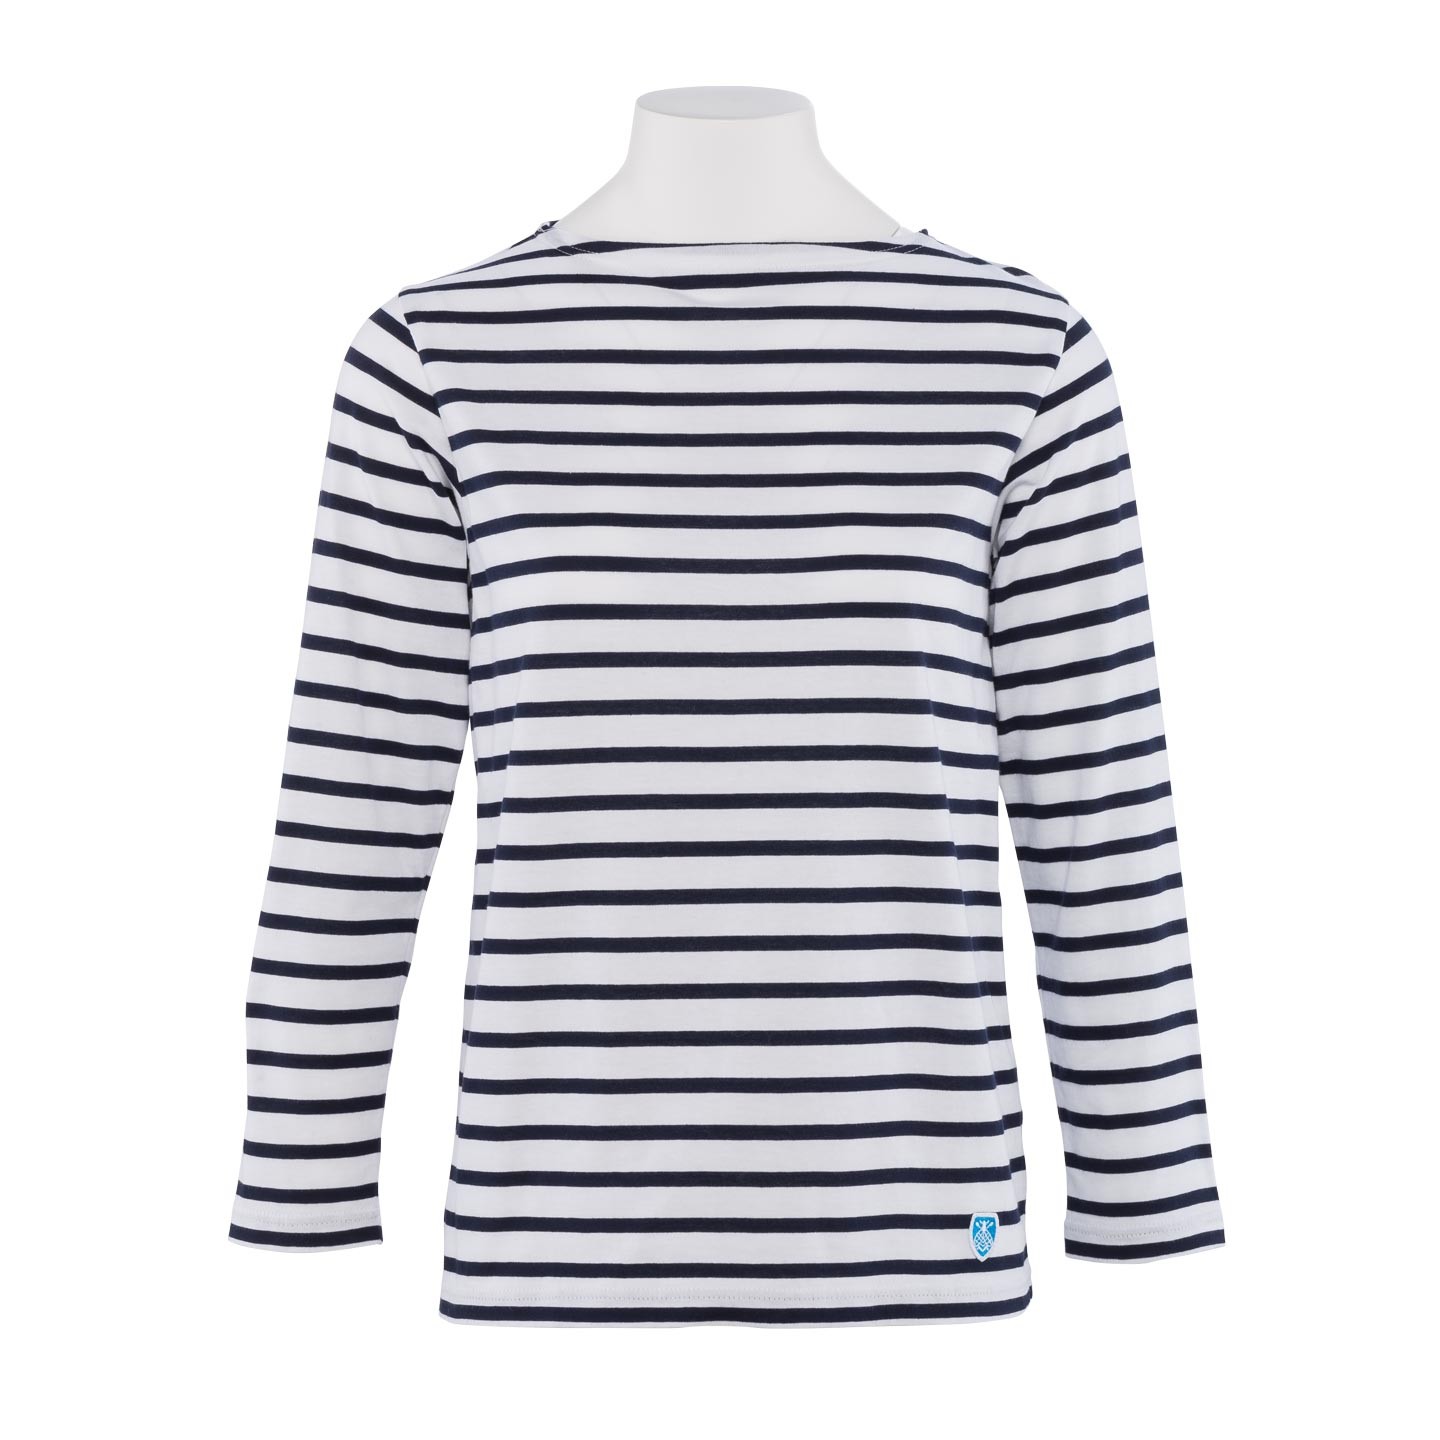 Striped shirt White / Navy, unisex made in France combed cotton Orcival